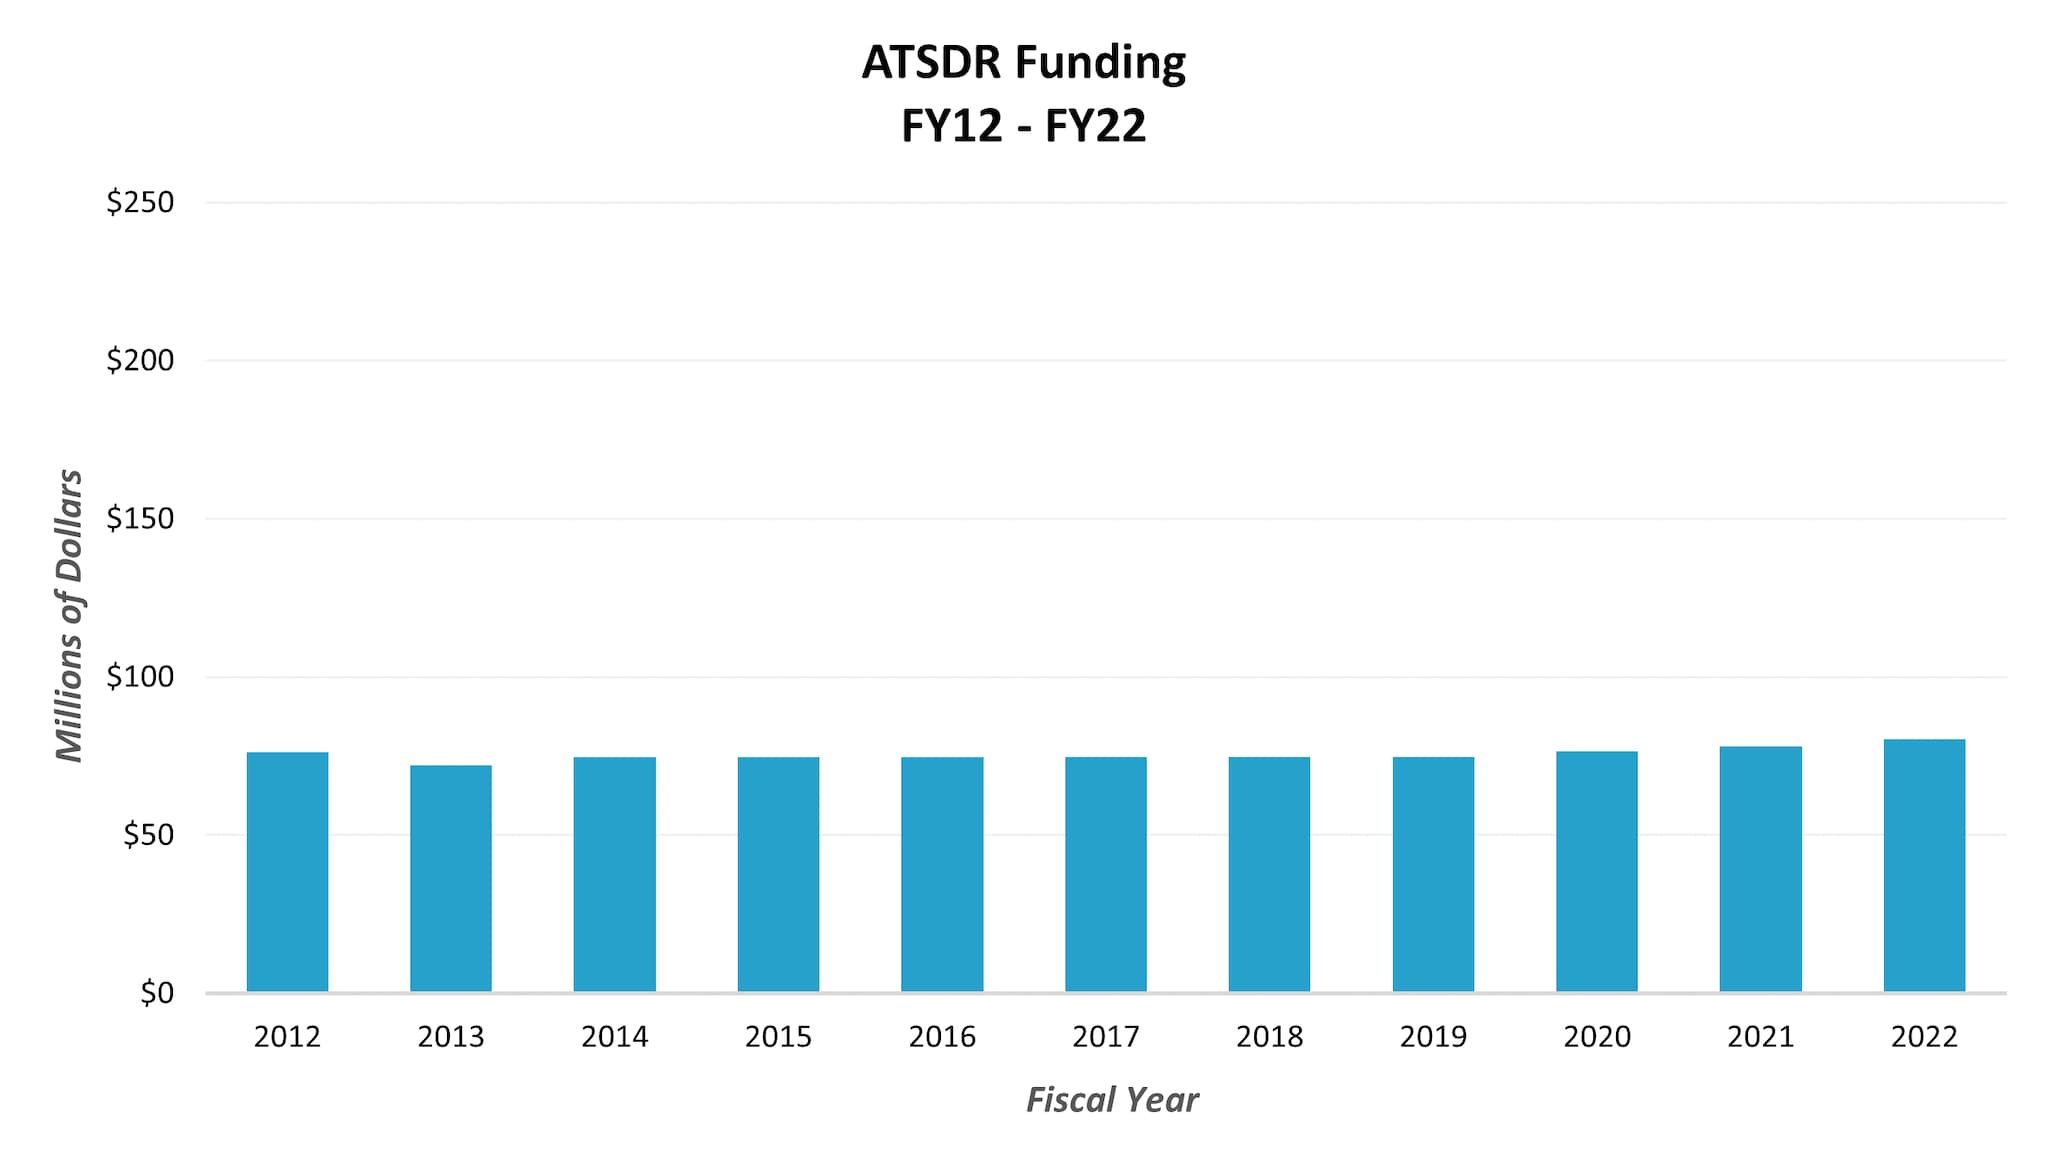 Bar chart showing ATSDR funding from FY 2012 through FY 2022